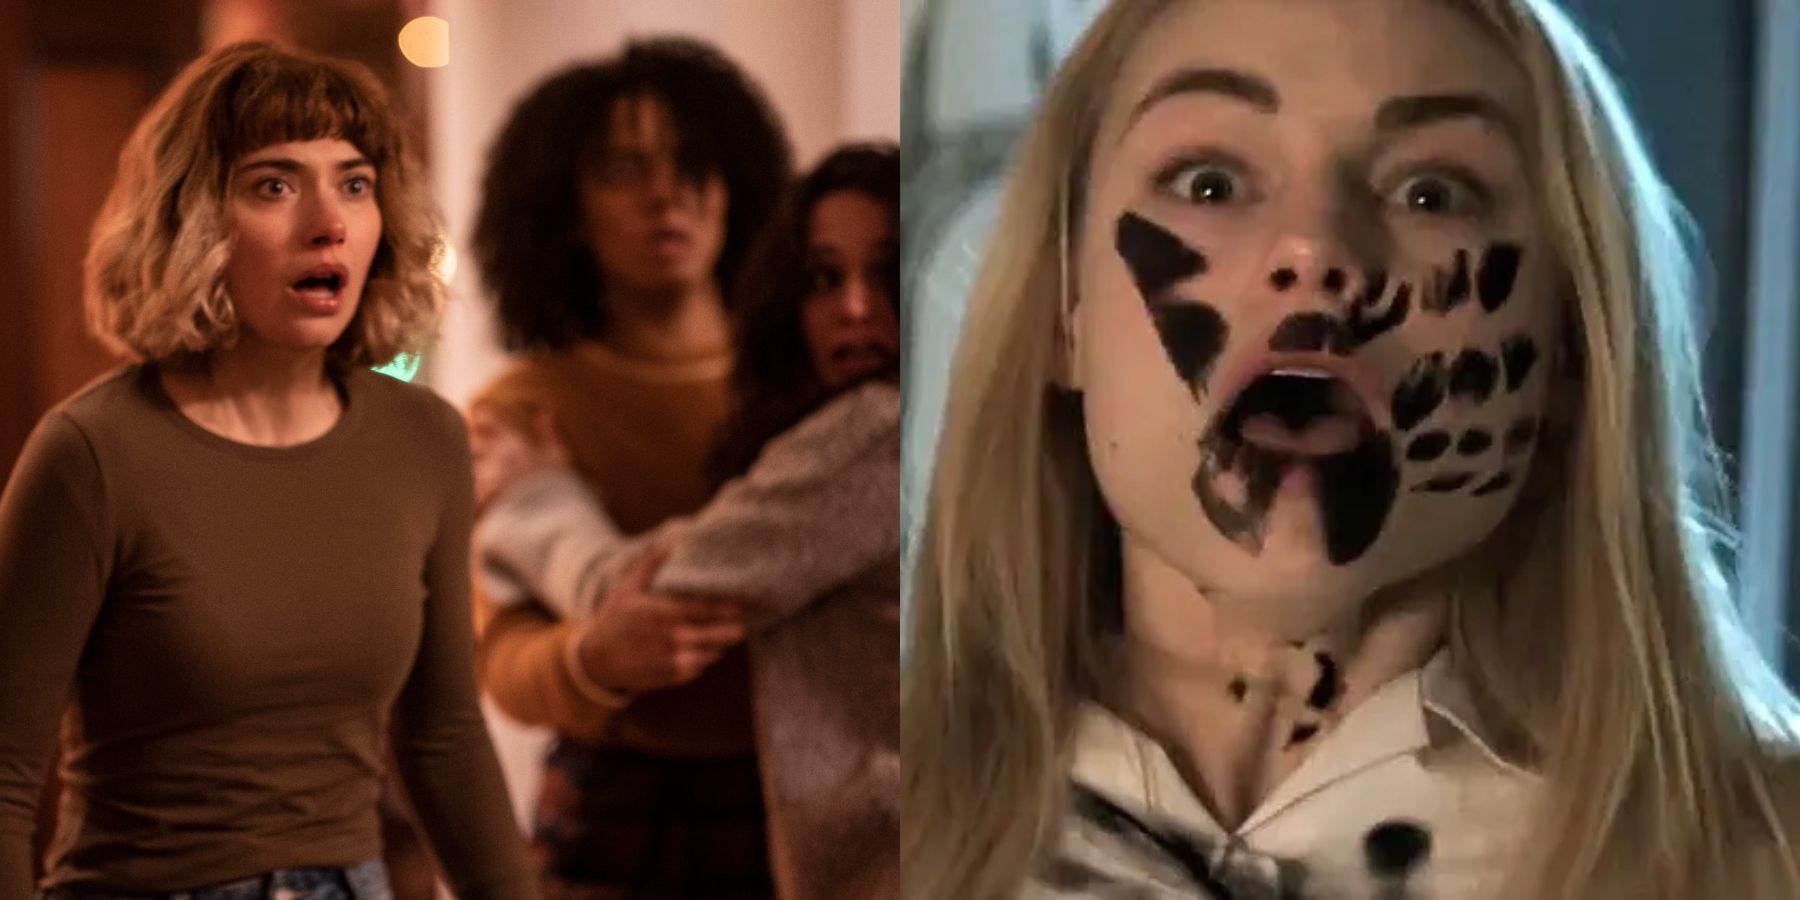 Split image of Riley (Imogen Poots) and Kris (Aleyse Shannon) in Black Christmas (2019) and Stephanie Taylor (Lucy Fry) in The Darkness (2016)